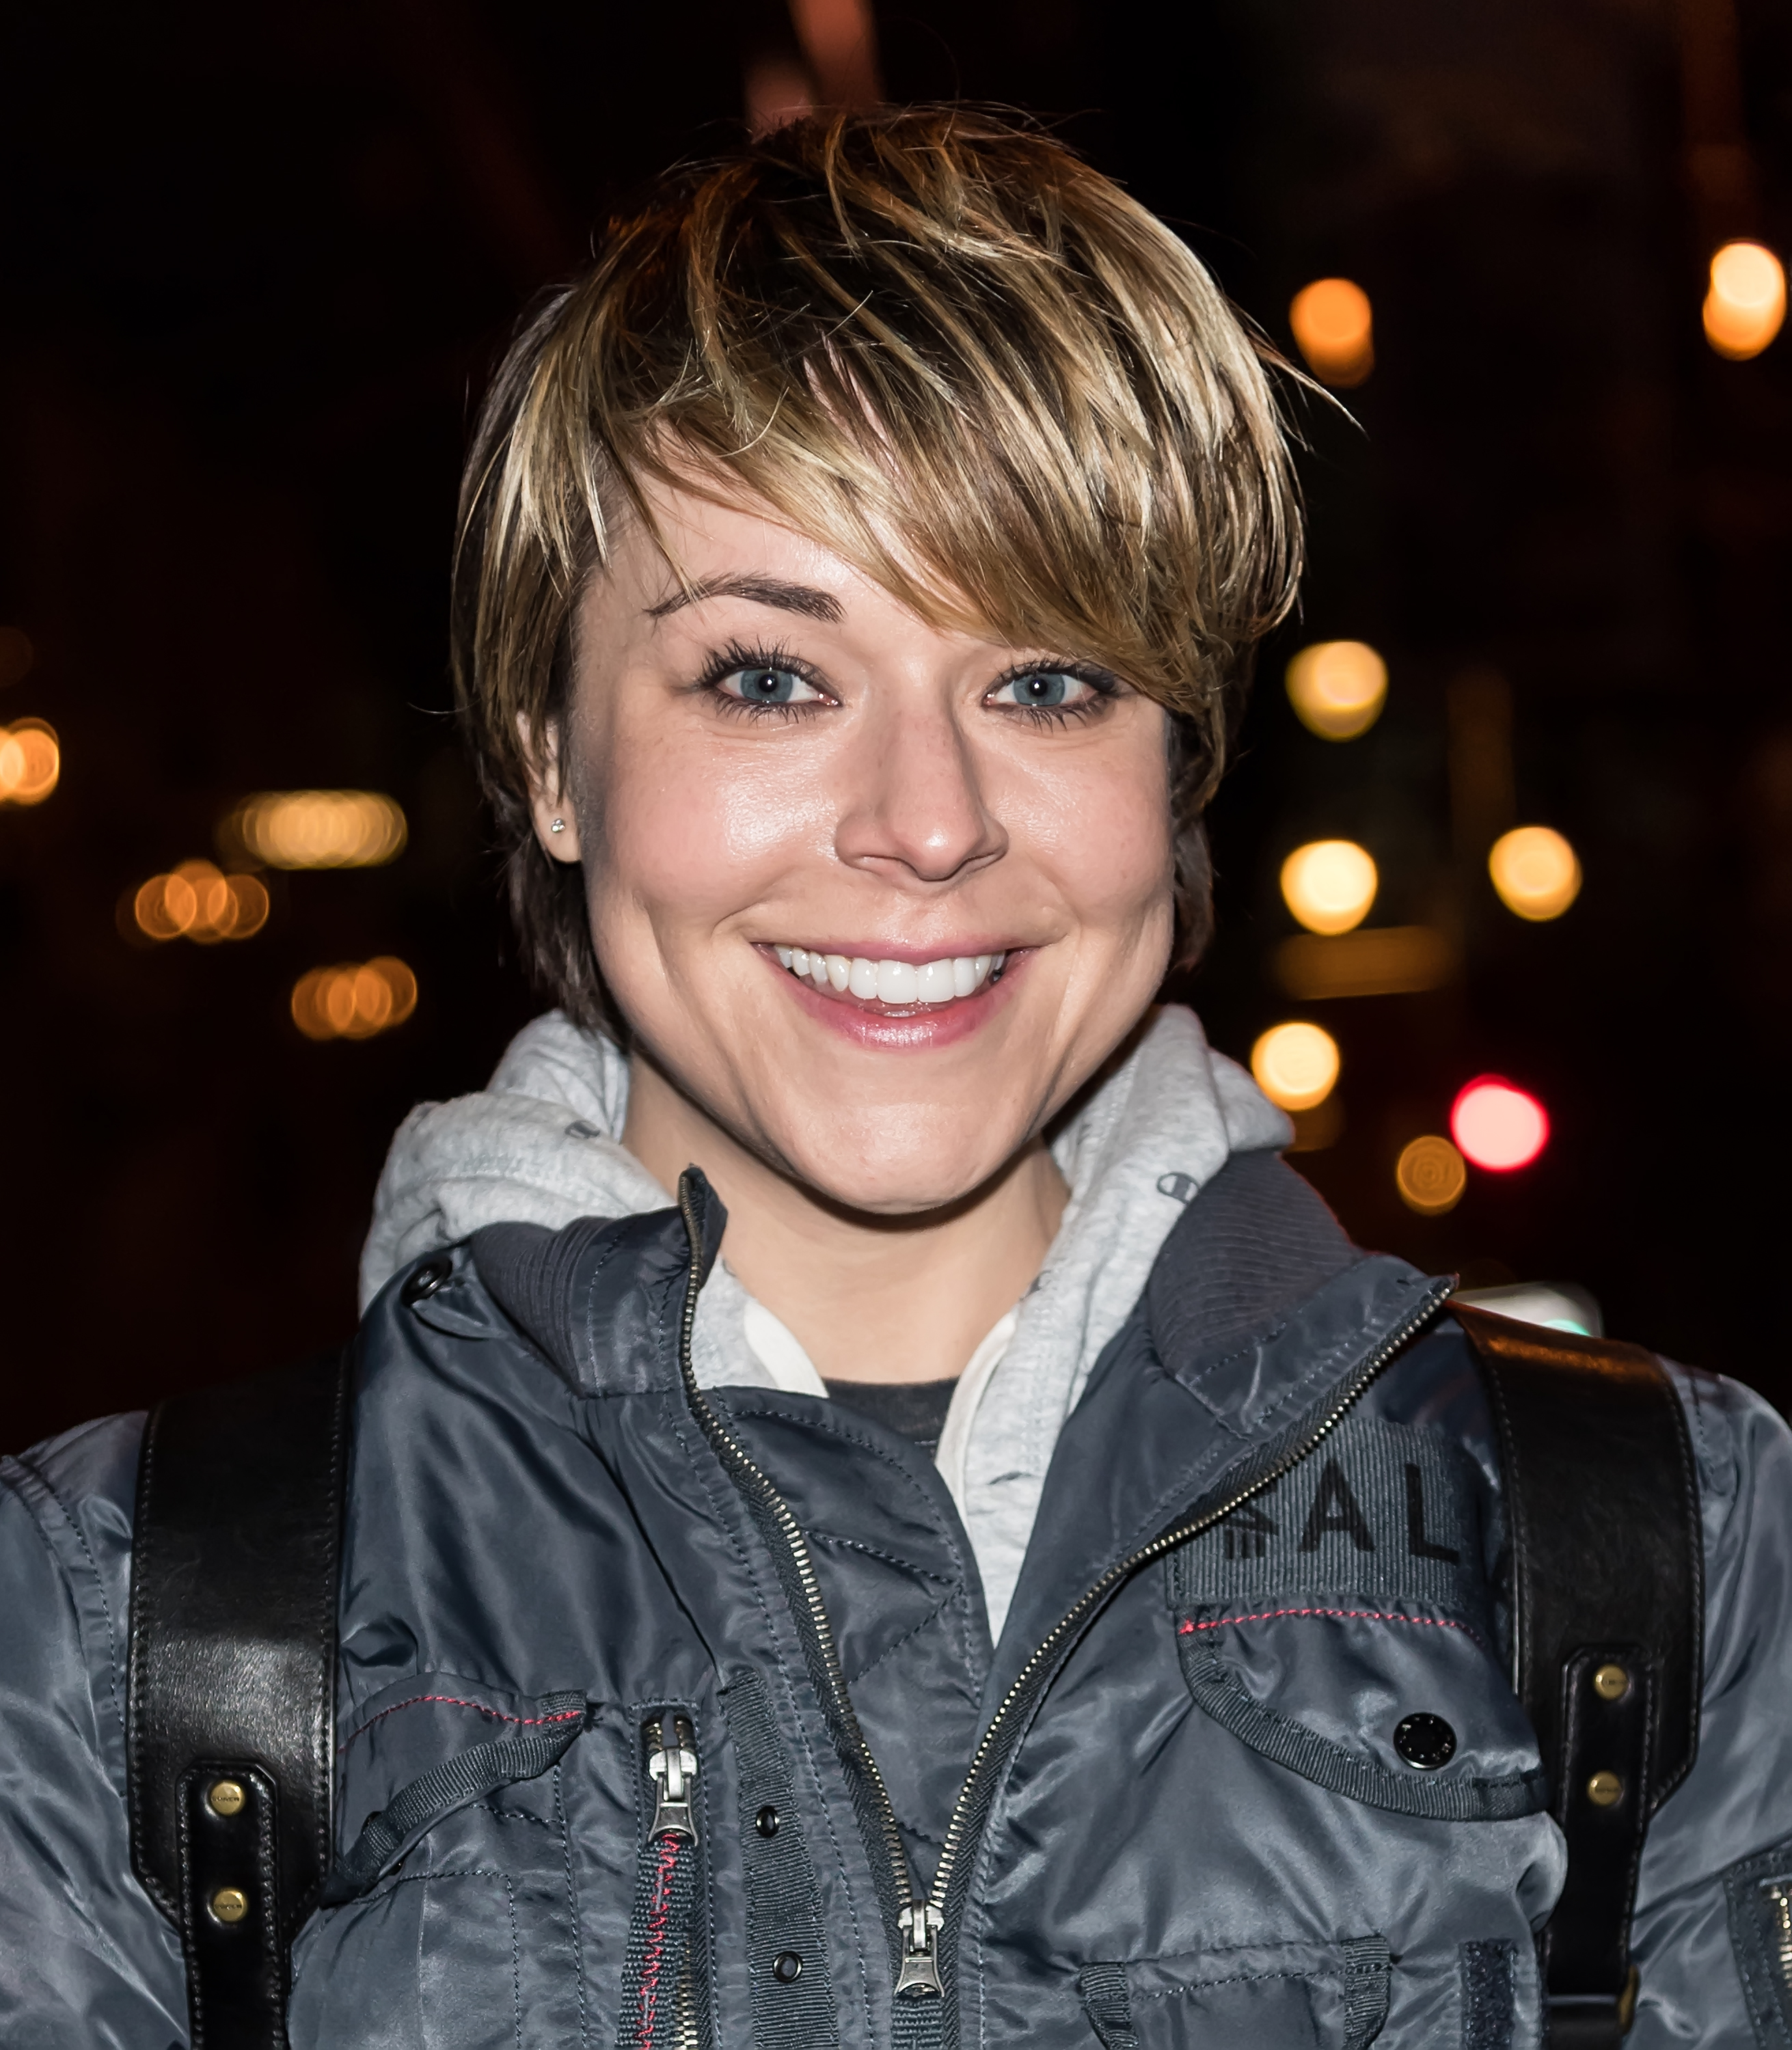 <p>Tina Majorino took a five-year hiatus from Hollywood before starring as Deb in "Napoleon Dynamite" in 2004. She went on to find success as a television actress with recurring roles on "Veronica Mars," "Big Love," "True Blood," "Grey's Anatomy" and "Legends." Tina also starred in the music video for Pink's "F*****' Perfect." She appeared in the 2014 "Veronica Mars" movie and starred on the TNT show "Legends" that same year and popped up on the television show "Scorpion" from 2017 to 2018, an episode of Hulu's "Into the Dark" in 2020 and did a stint on "The Good Doctor" in 2022. She can also be seen in 2022's "I, Challenger." </p>